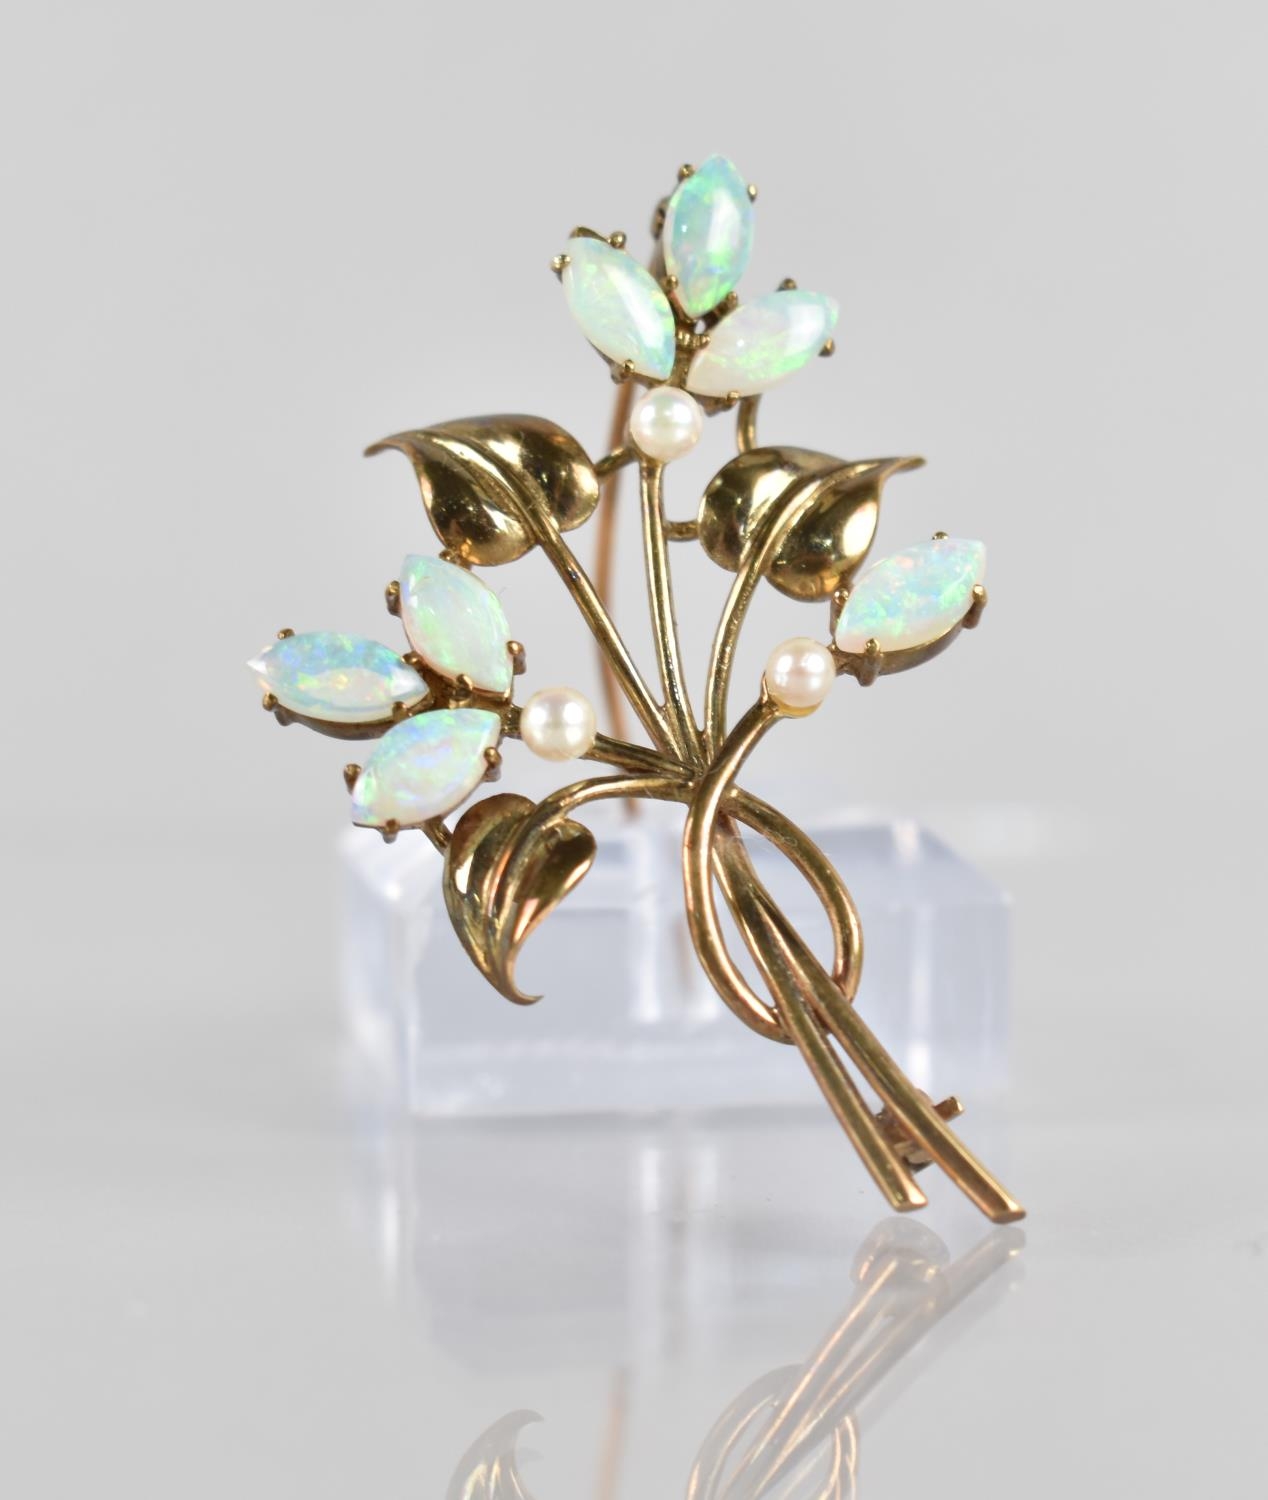 A 9ct Gold, Opal and Pearl Brooch in the Form of a Spray of Flowers and Leaves, 53mm Long, 6.9gms,